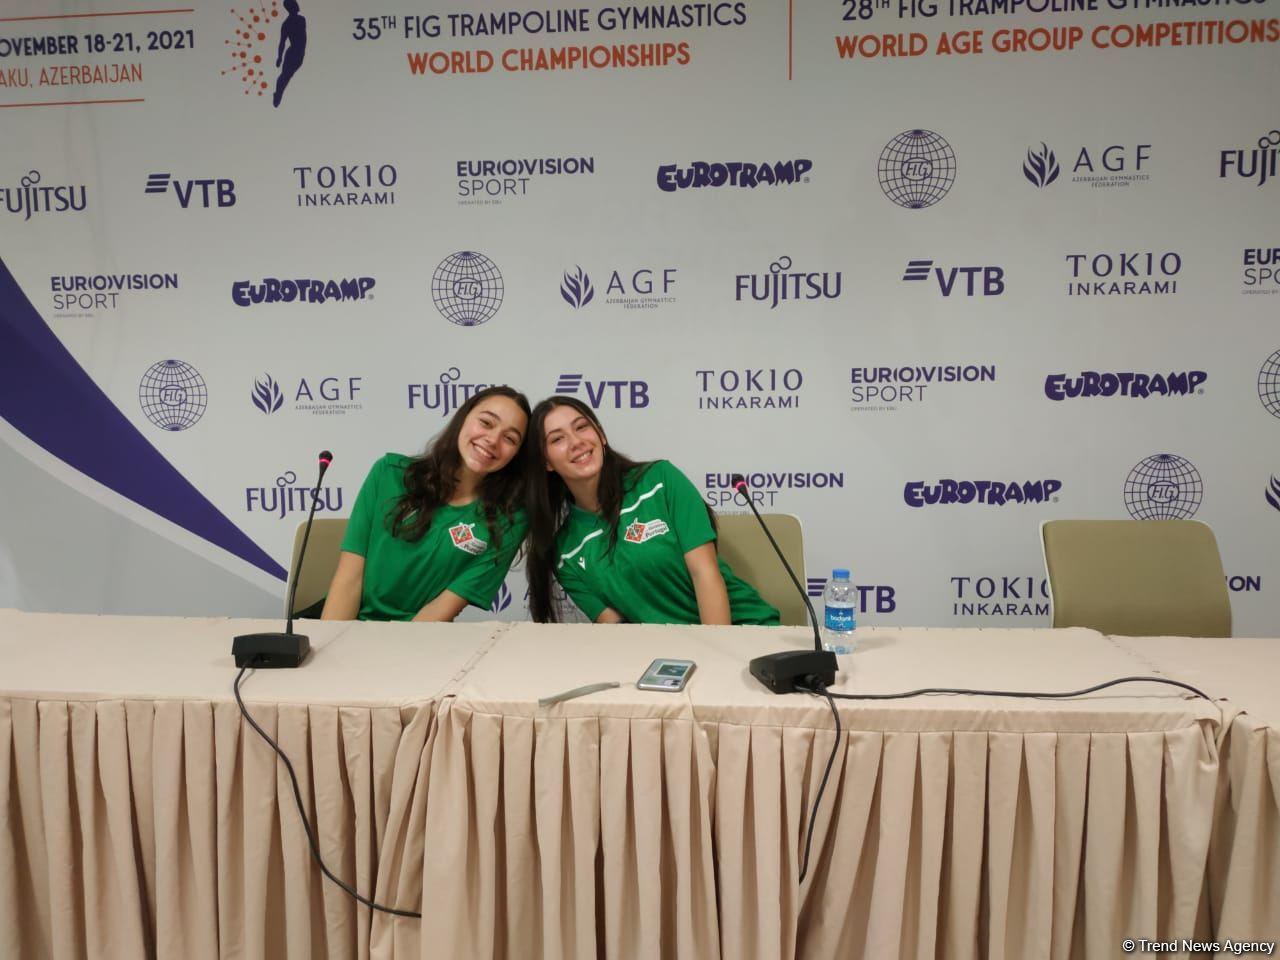 We hope to show good results at competitions in Baku - Portuguese gymnasts